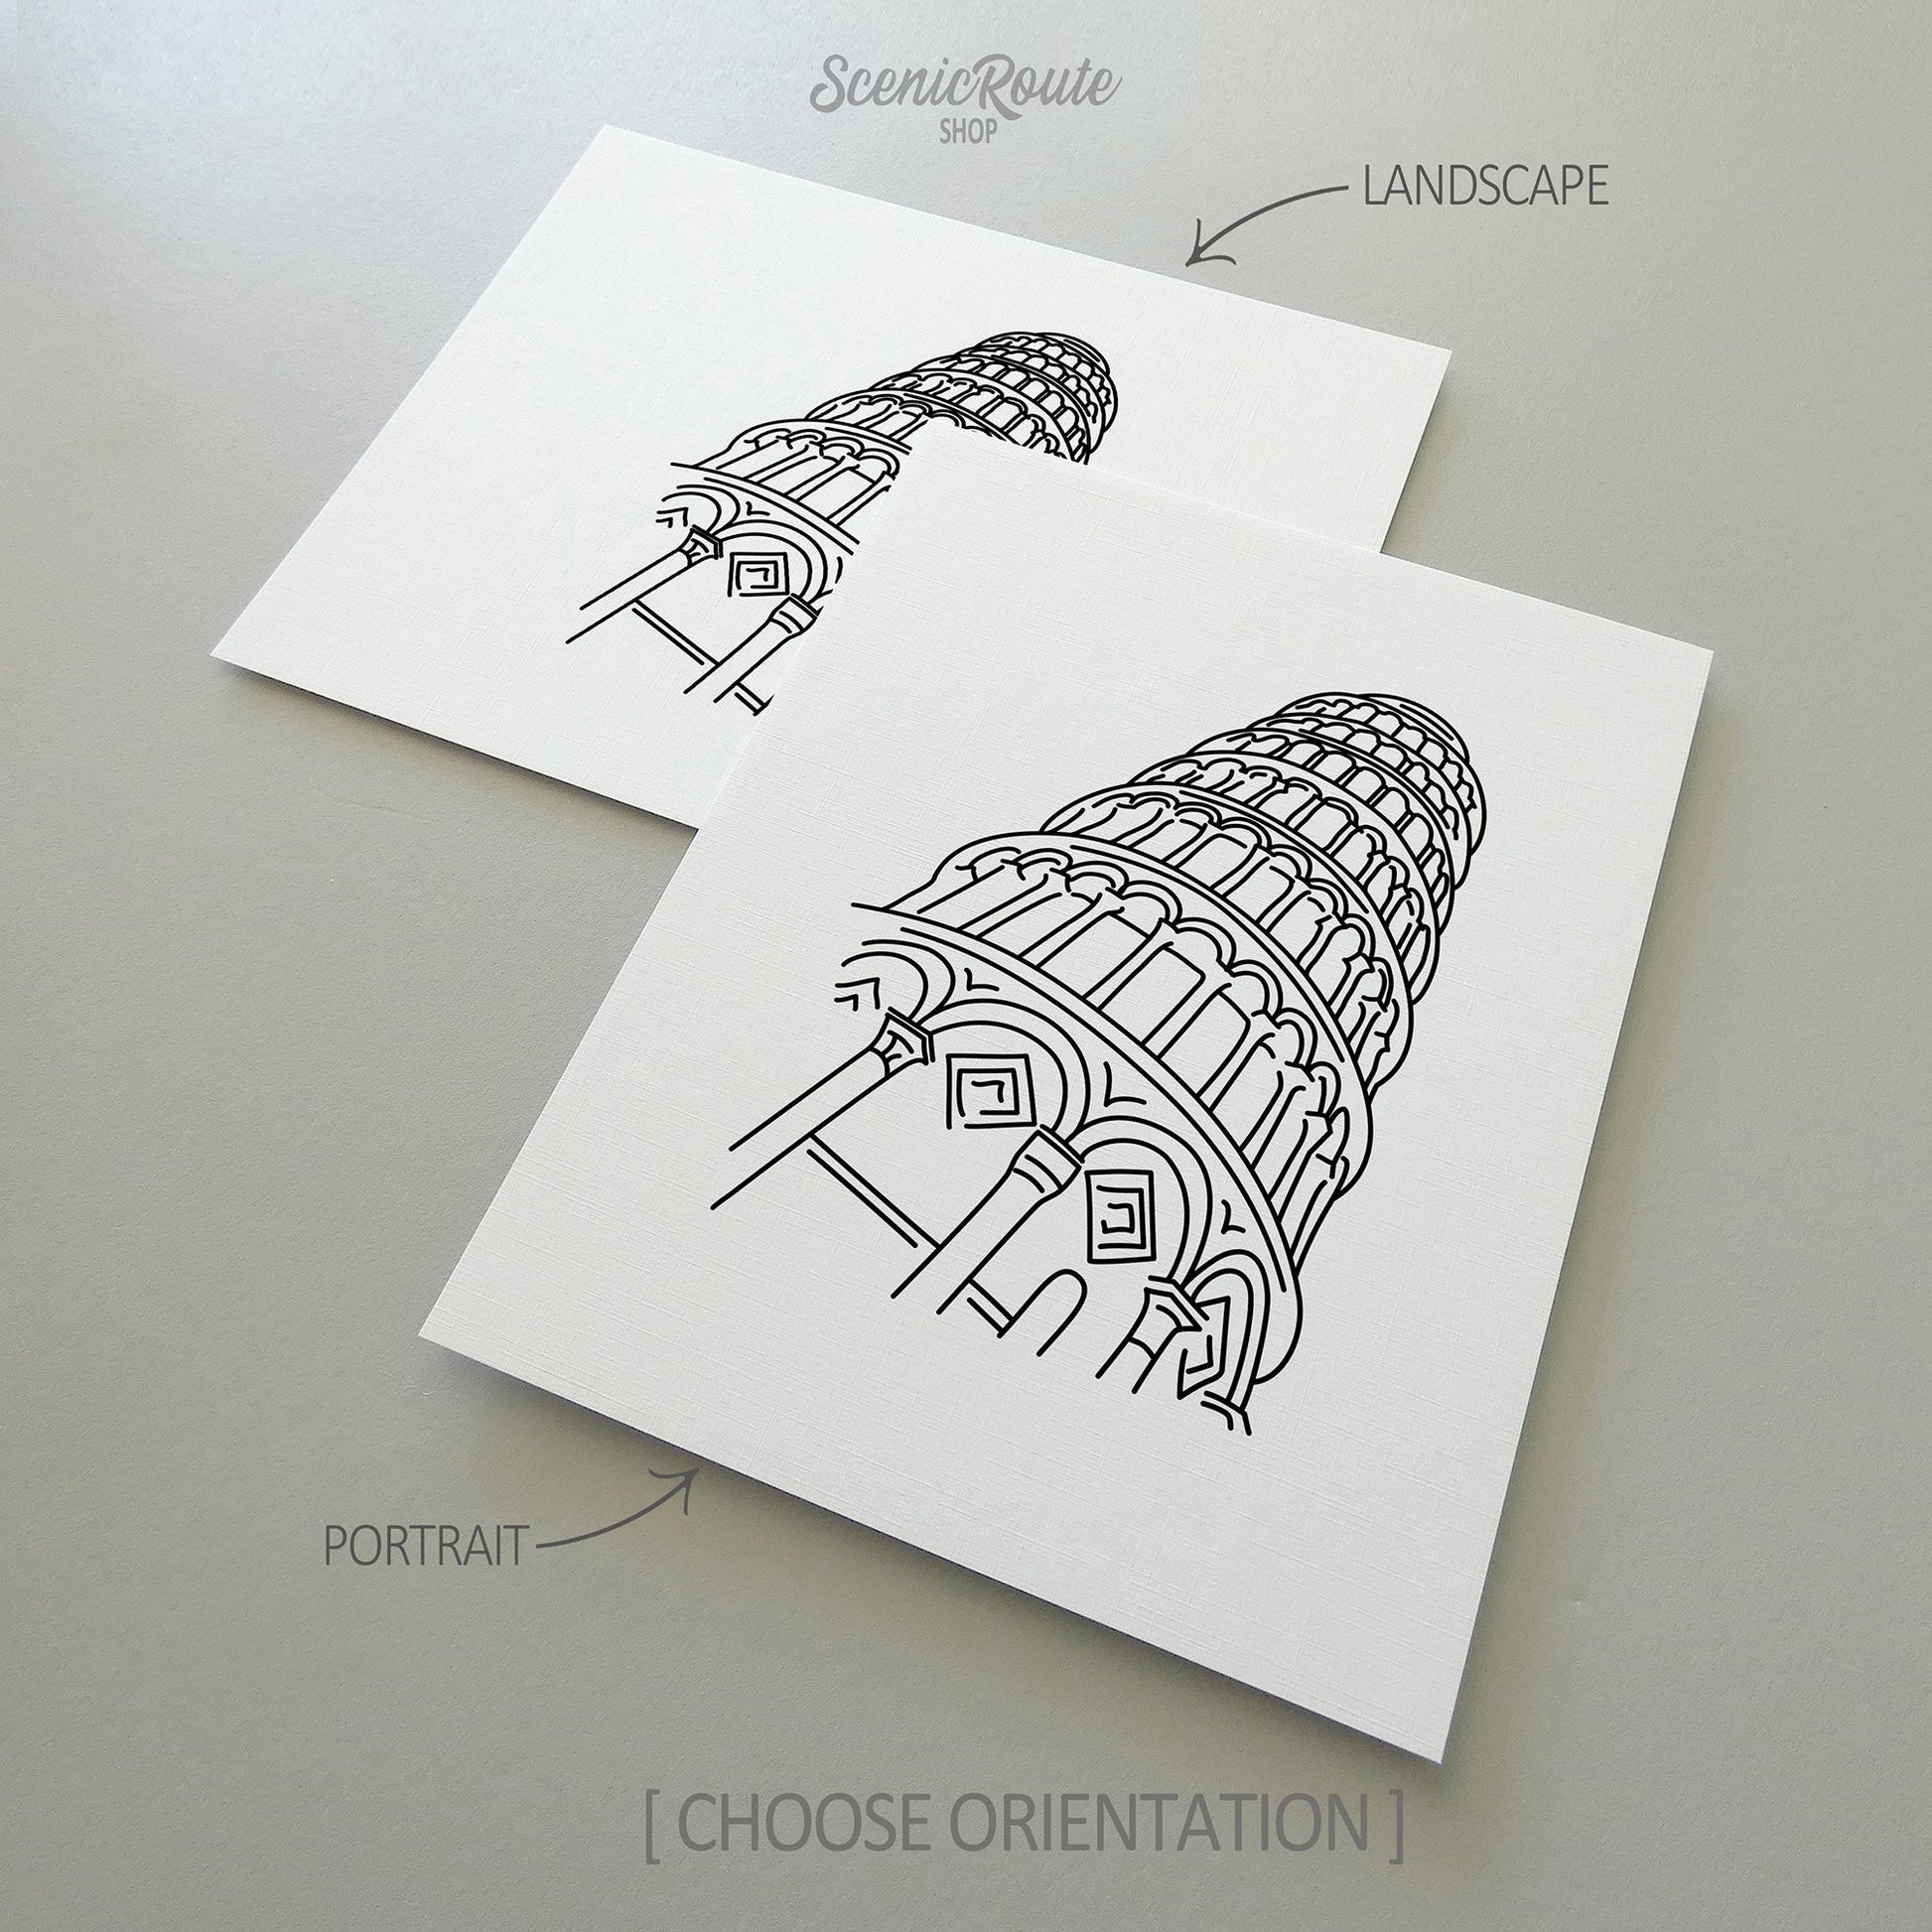 Two line art drawings of the Leaning Tower of Pisa on white linen paper with a gray background.  The pieces are shown in portrait and landscape orientation for the available art print options.